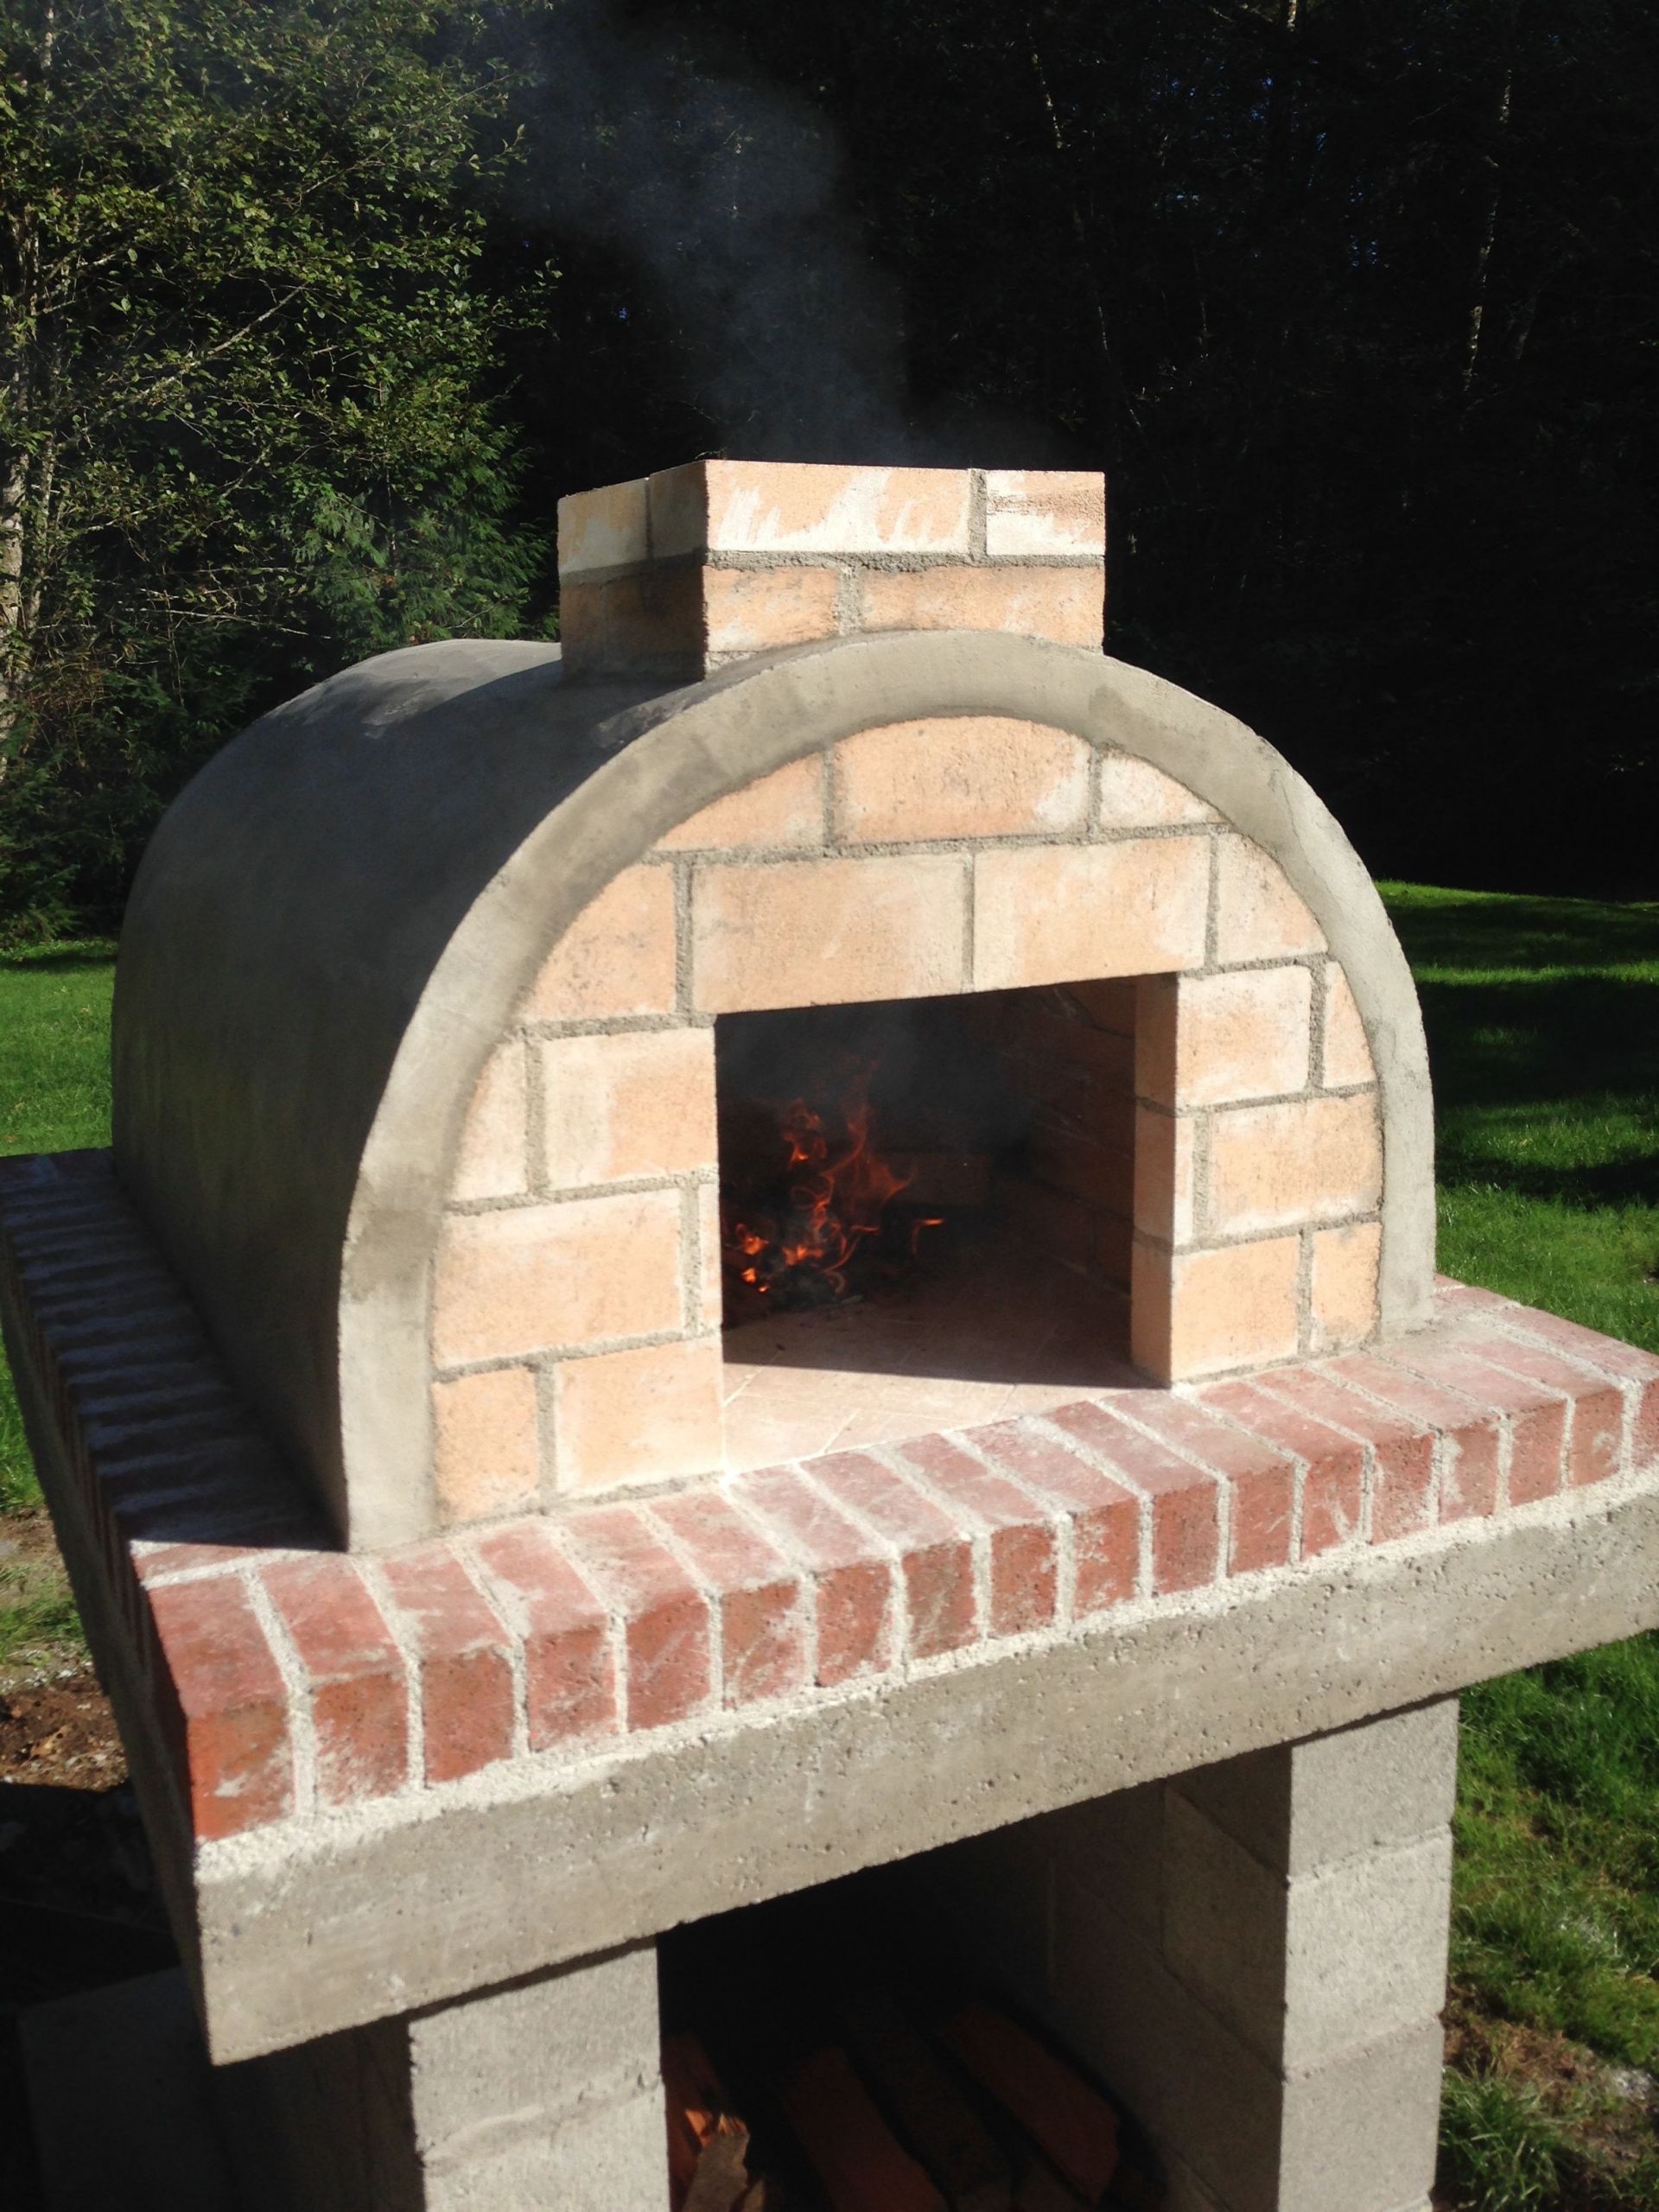 DIY Wood Ovens
 Anderson Family Wood Fired Outdoor DIY Pizza Oven by